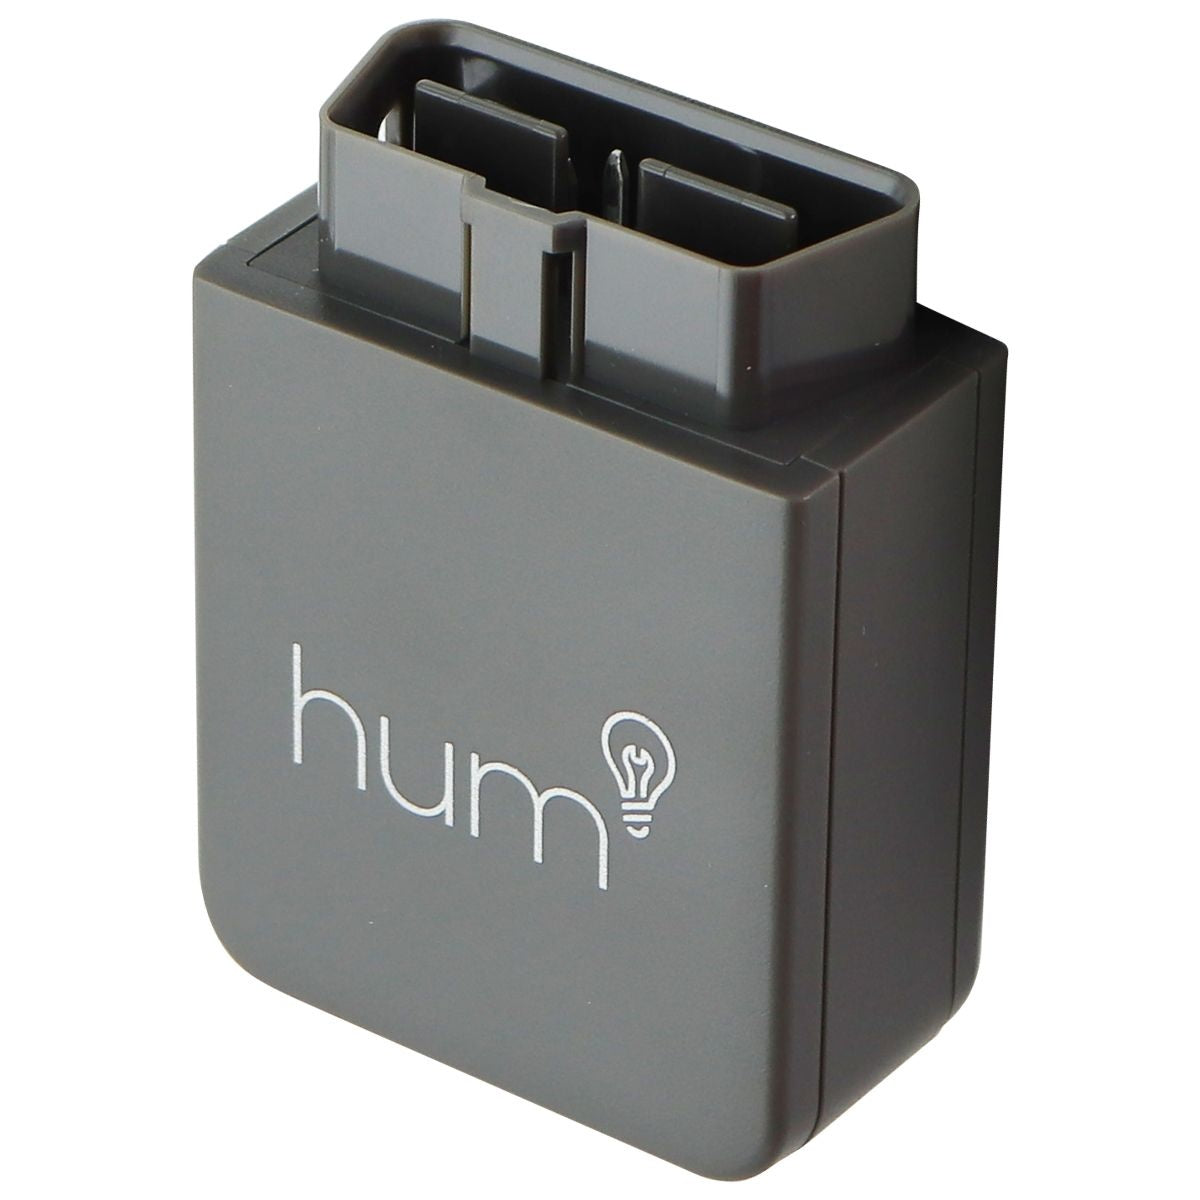 Hum+ (Gen 2) Telematics OBD Reader from Verizon - Gray (VZ-0410-001-US) Car Video - Other Vehicle Electronics Hum    - Simple Cell Bulk Wholesale Pricing - USA Seller